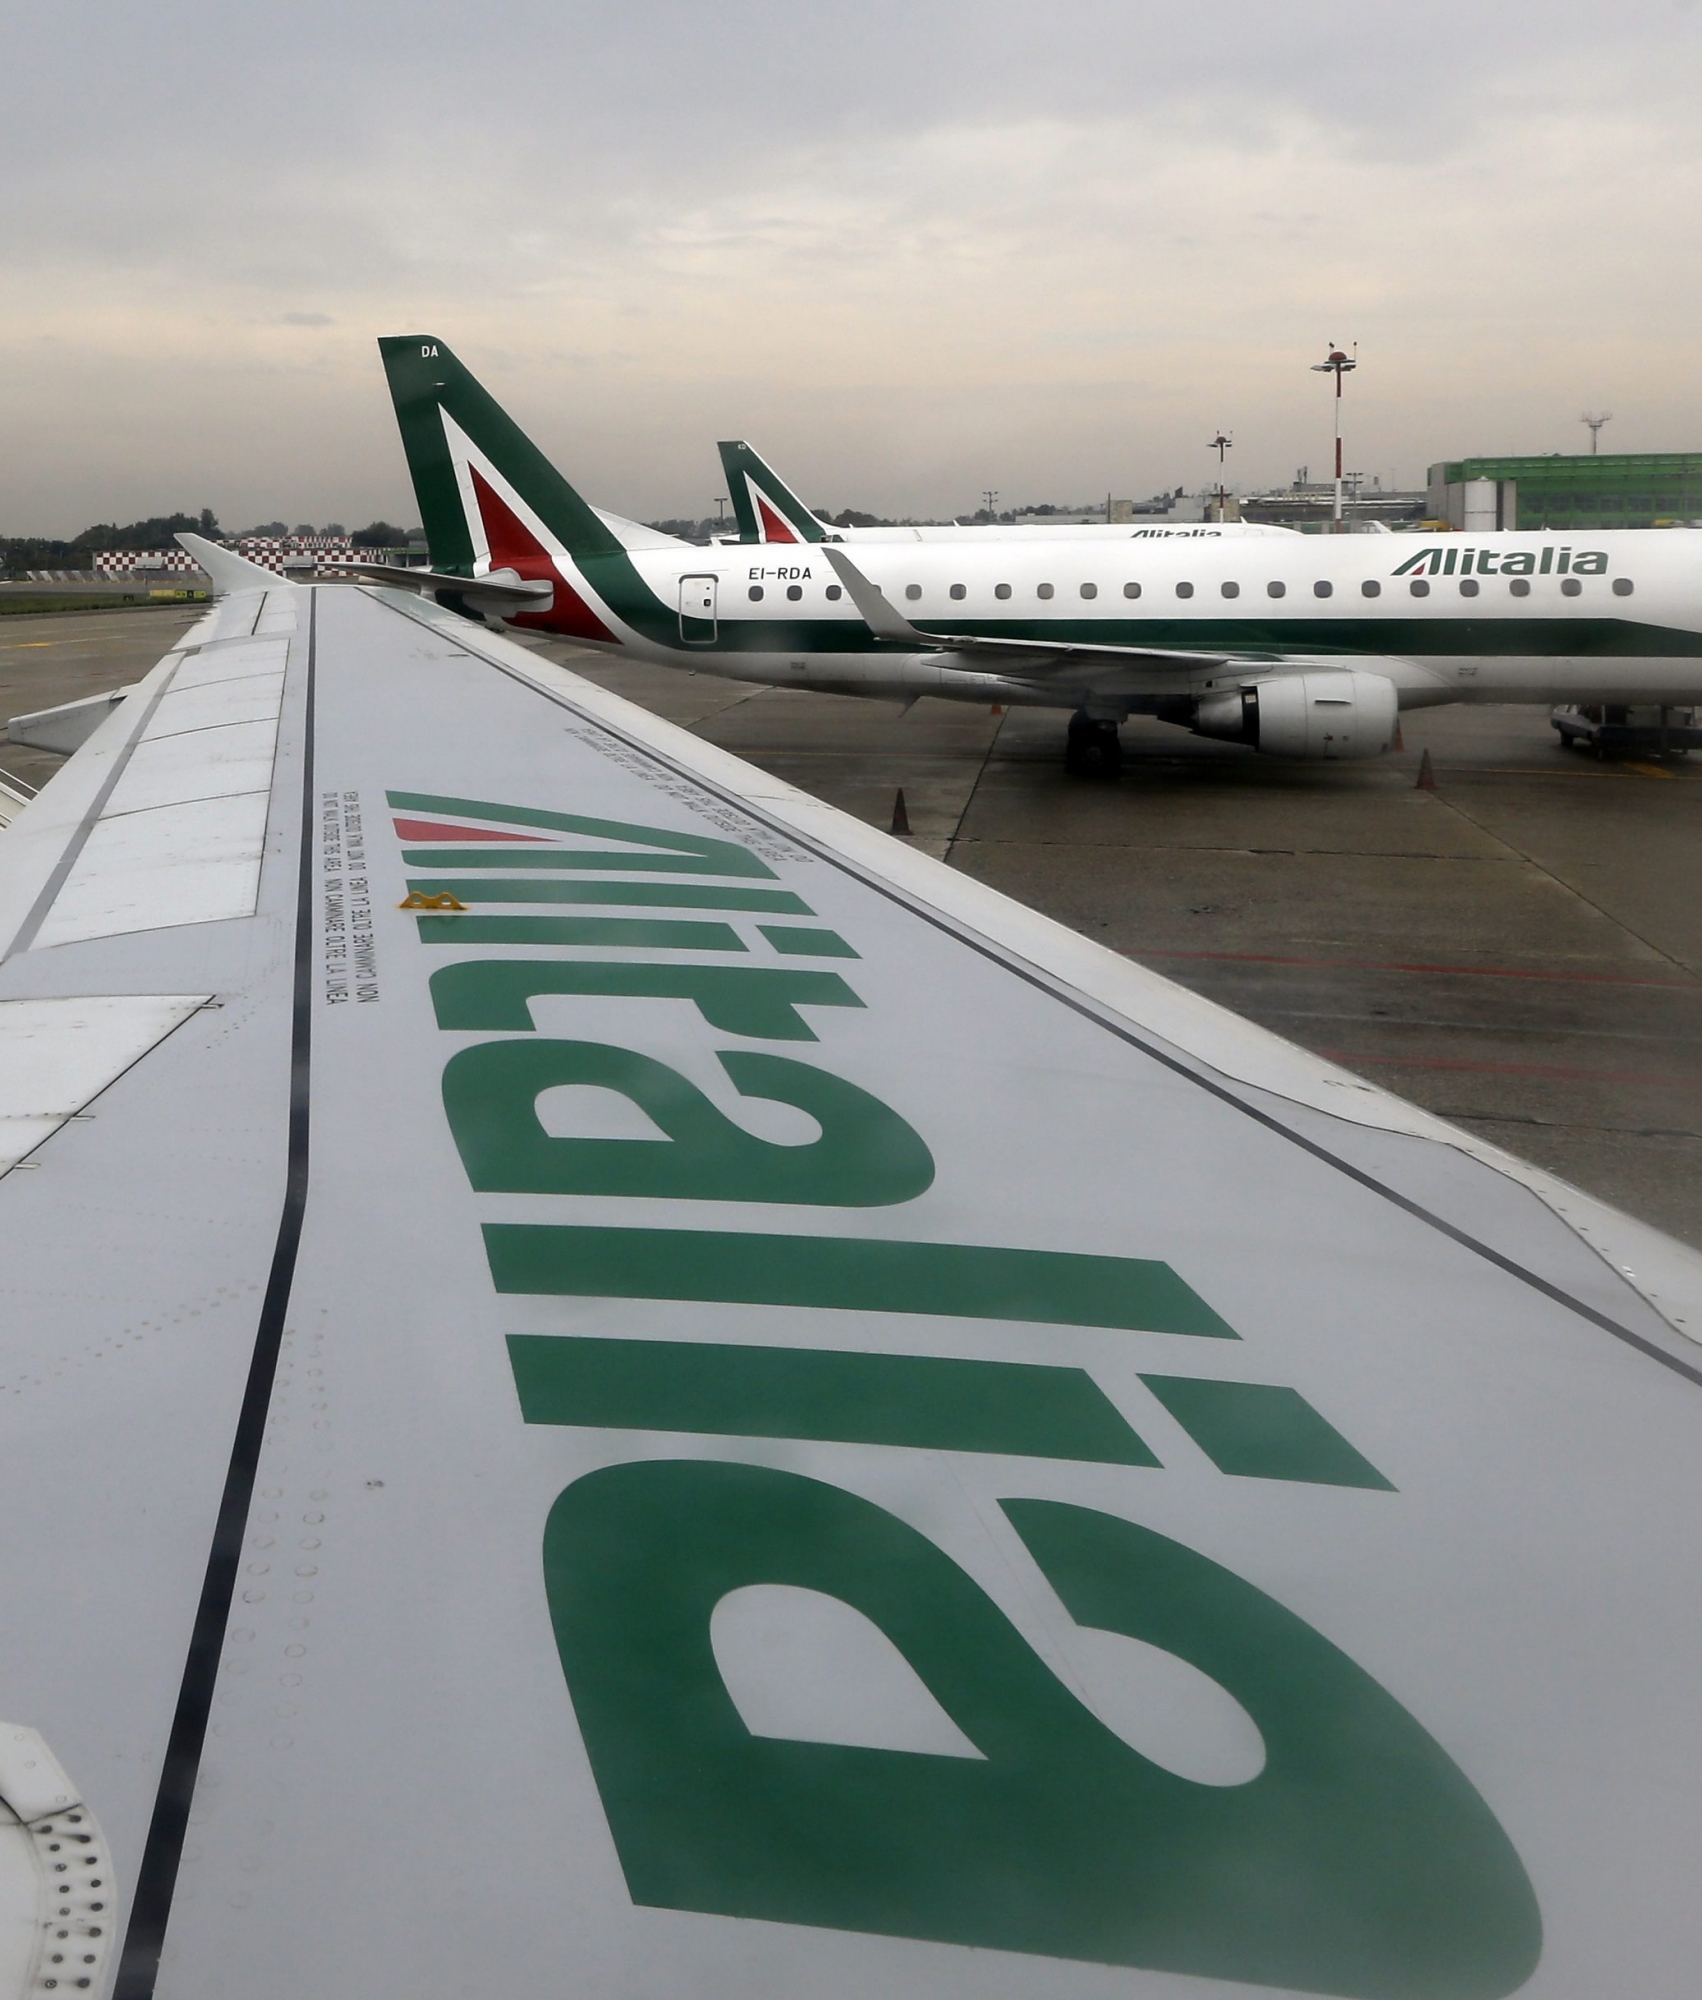 Alitalia planes are waiting on the tarmac at the Linate airport in Milan, Italy, Tuesday, Oct. 8, 2013. Struggling Italian airline Alitalia is asking shareholders to approve a capital increase of at least 100 million euro ($135 million). Alitalia said an extraordinary shareholders meeting on Oct. 14 will deliberate the capital increase, approved by the board at a meeting last Thursday in Rome. News reports say Air France is considering boosting its stake in Alitalia.  (AP Photo/Luca Bruno) Italy Alitalia